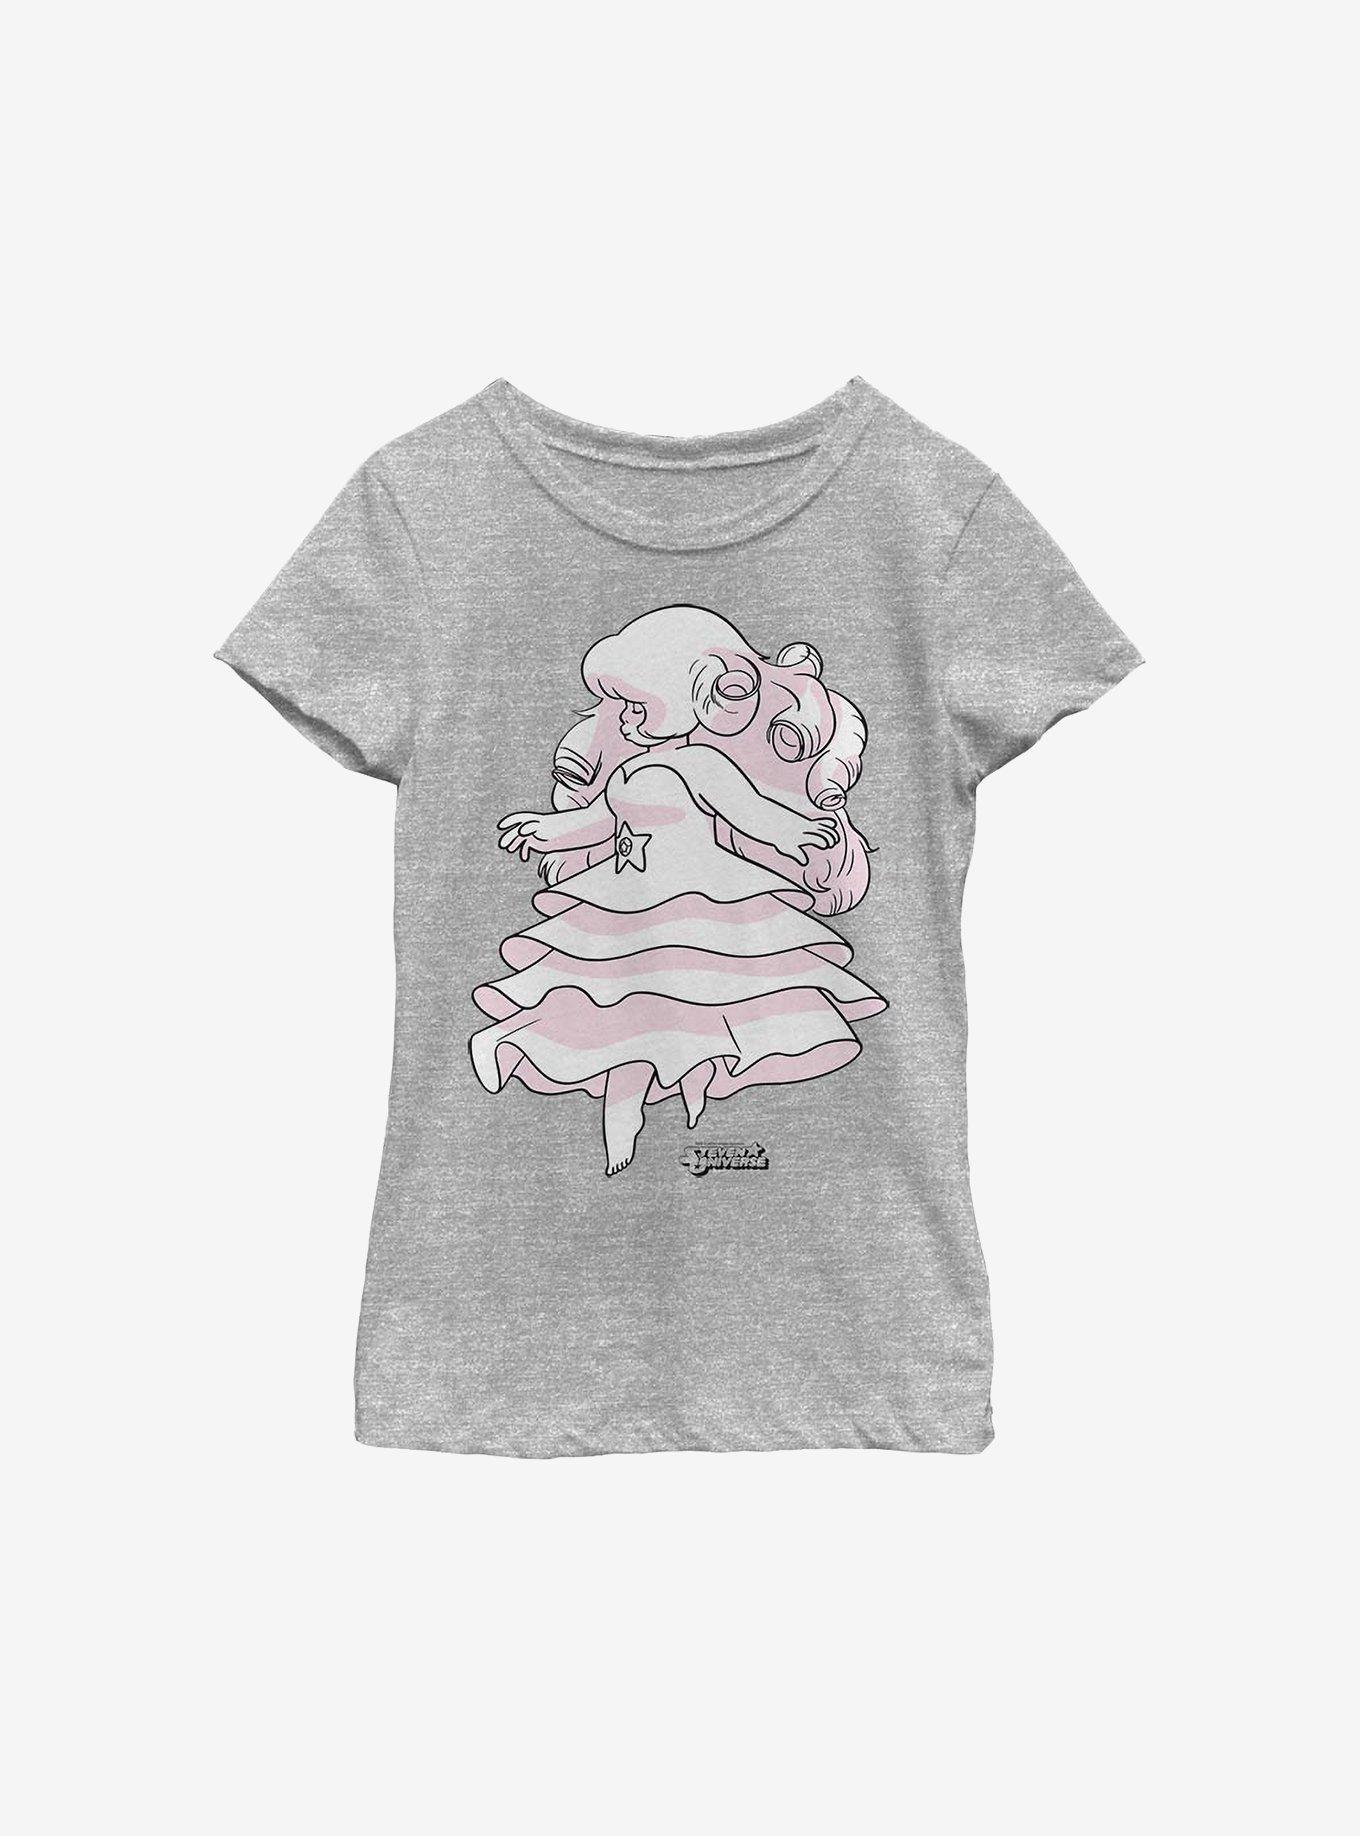 OFFICIAL Steven Universe T-Shirts and Merchandise | BoxLunch ...